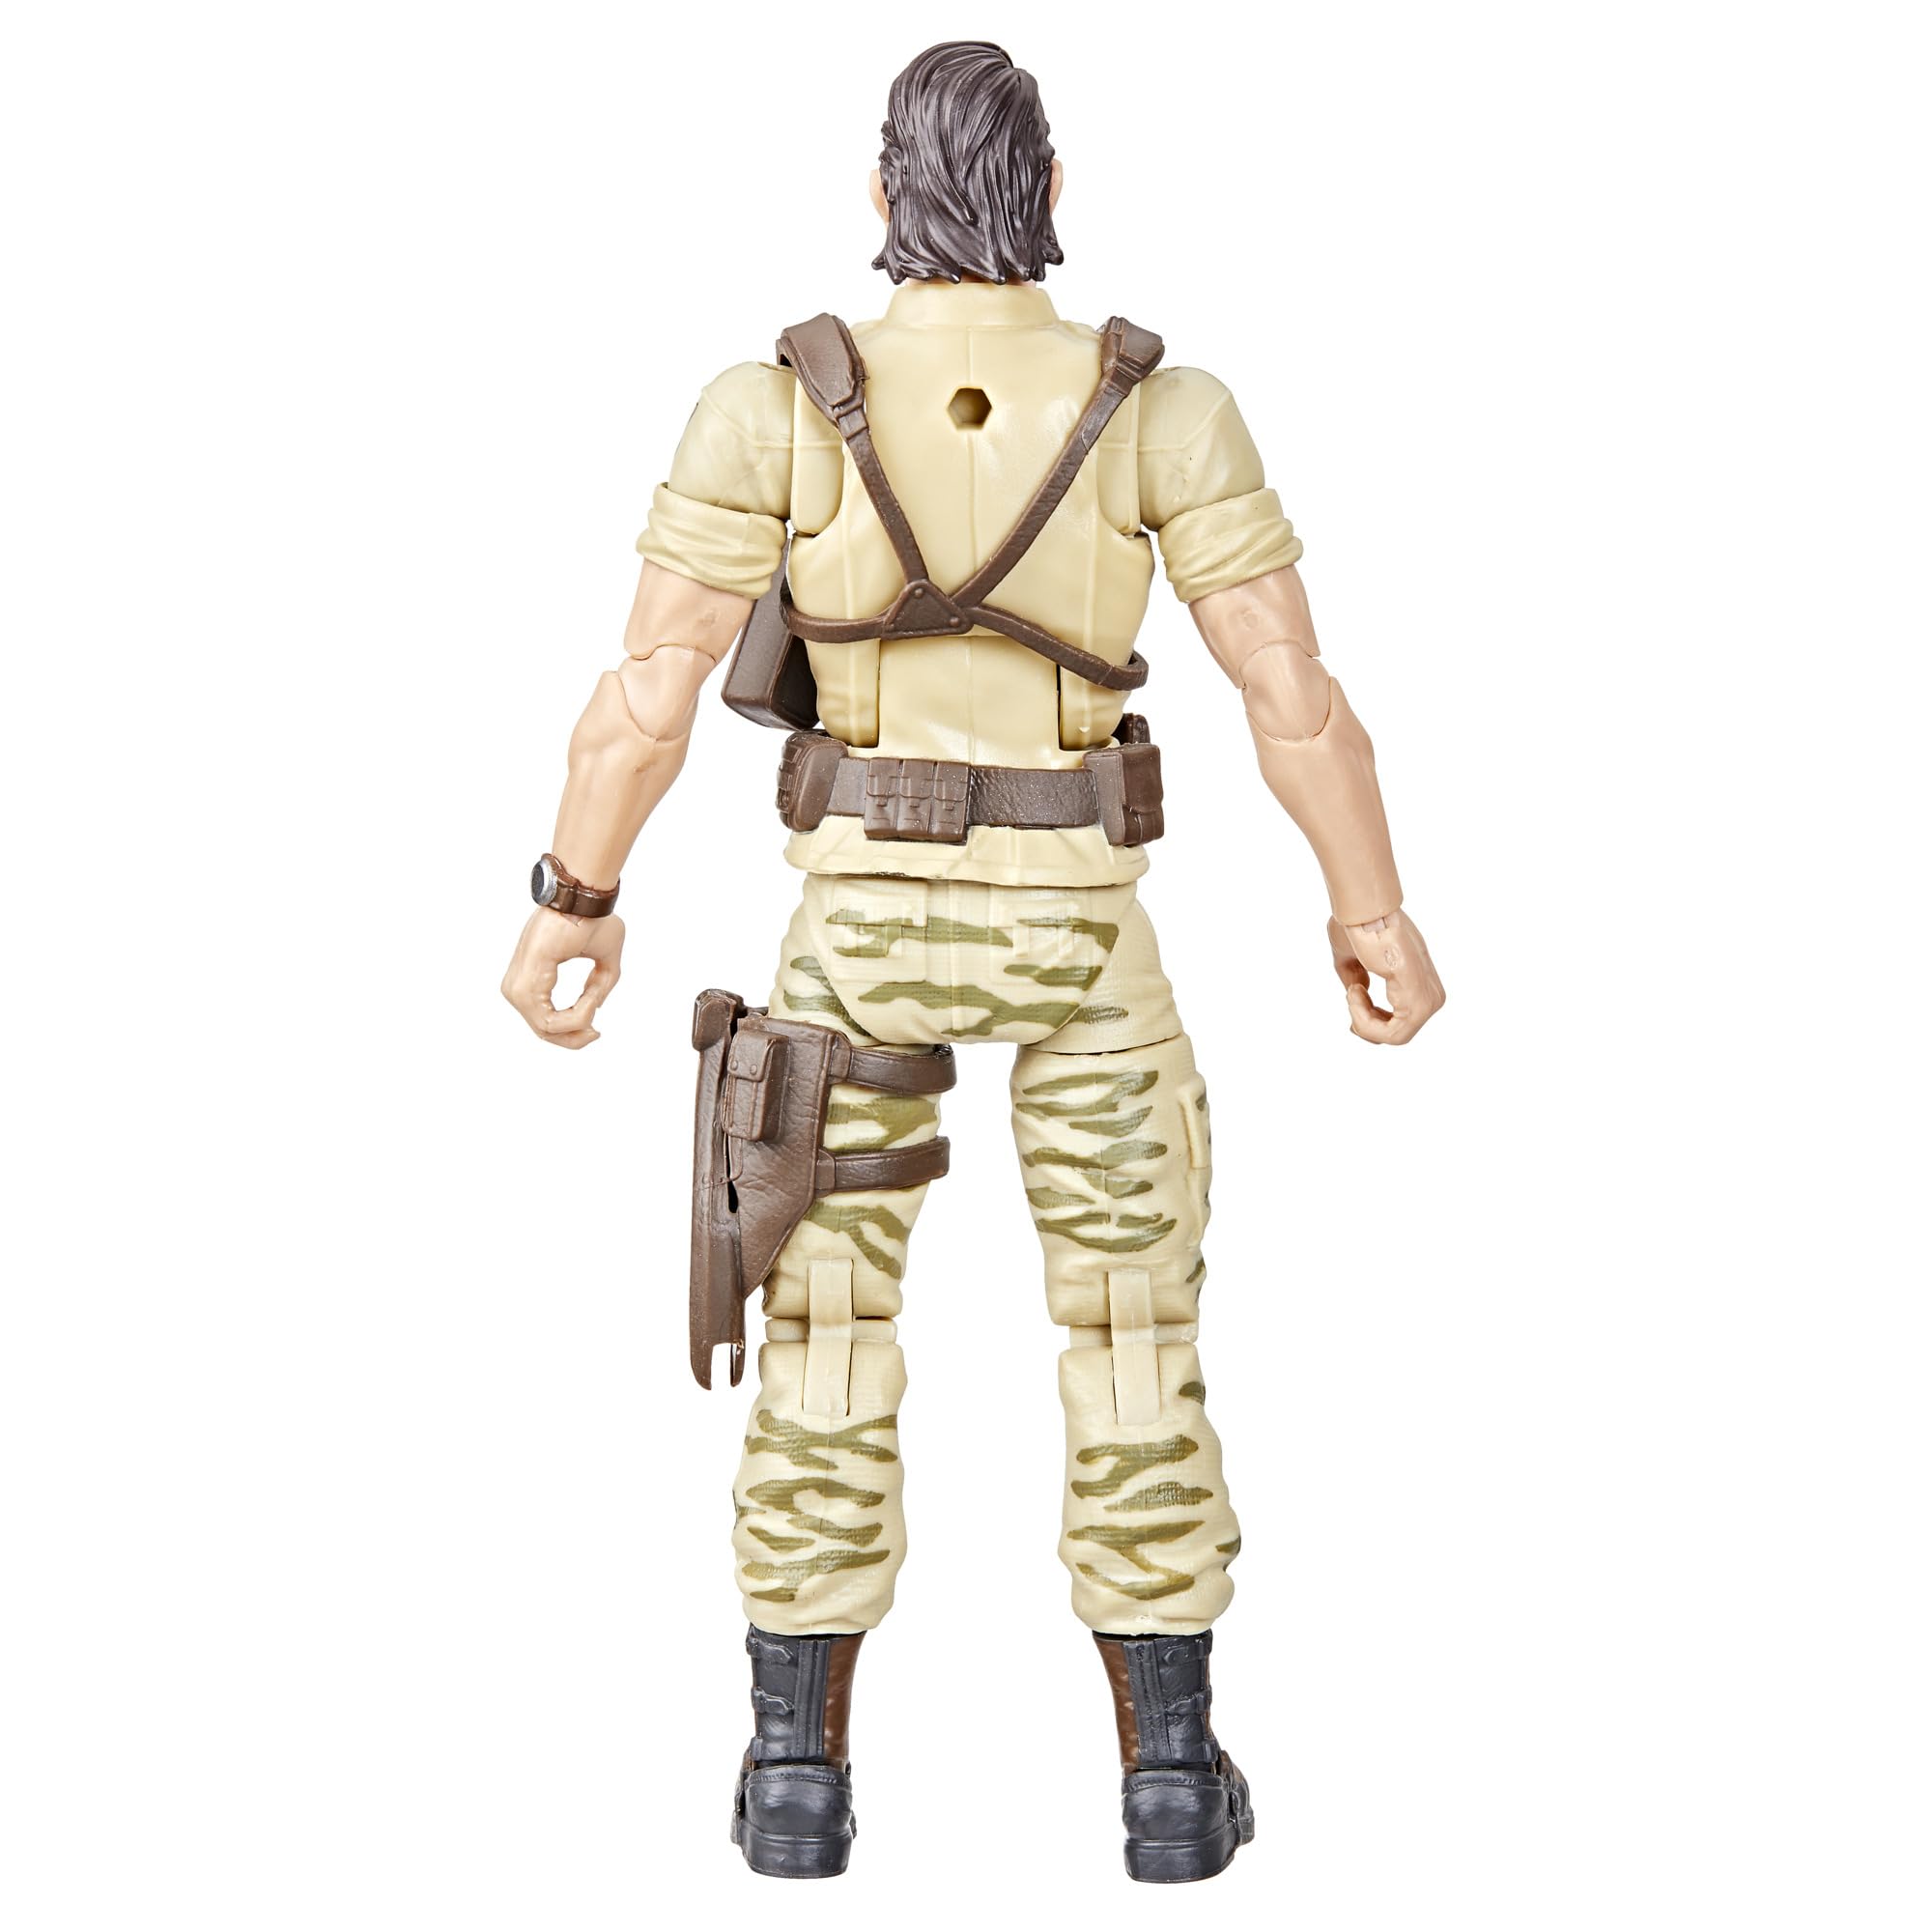 G.I. Joe Classified Series Retro Cardback Recondo, Collectible 6-Inch Action Figure with 7 Accessories